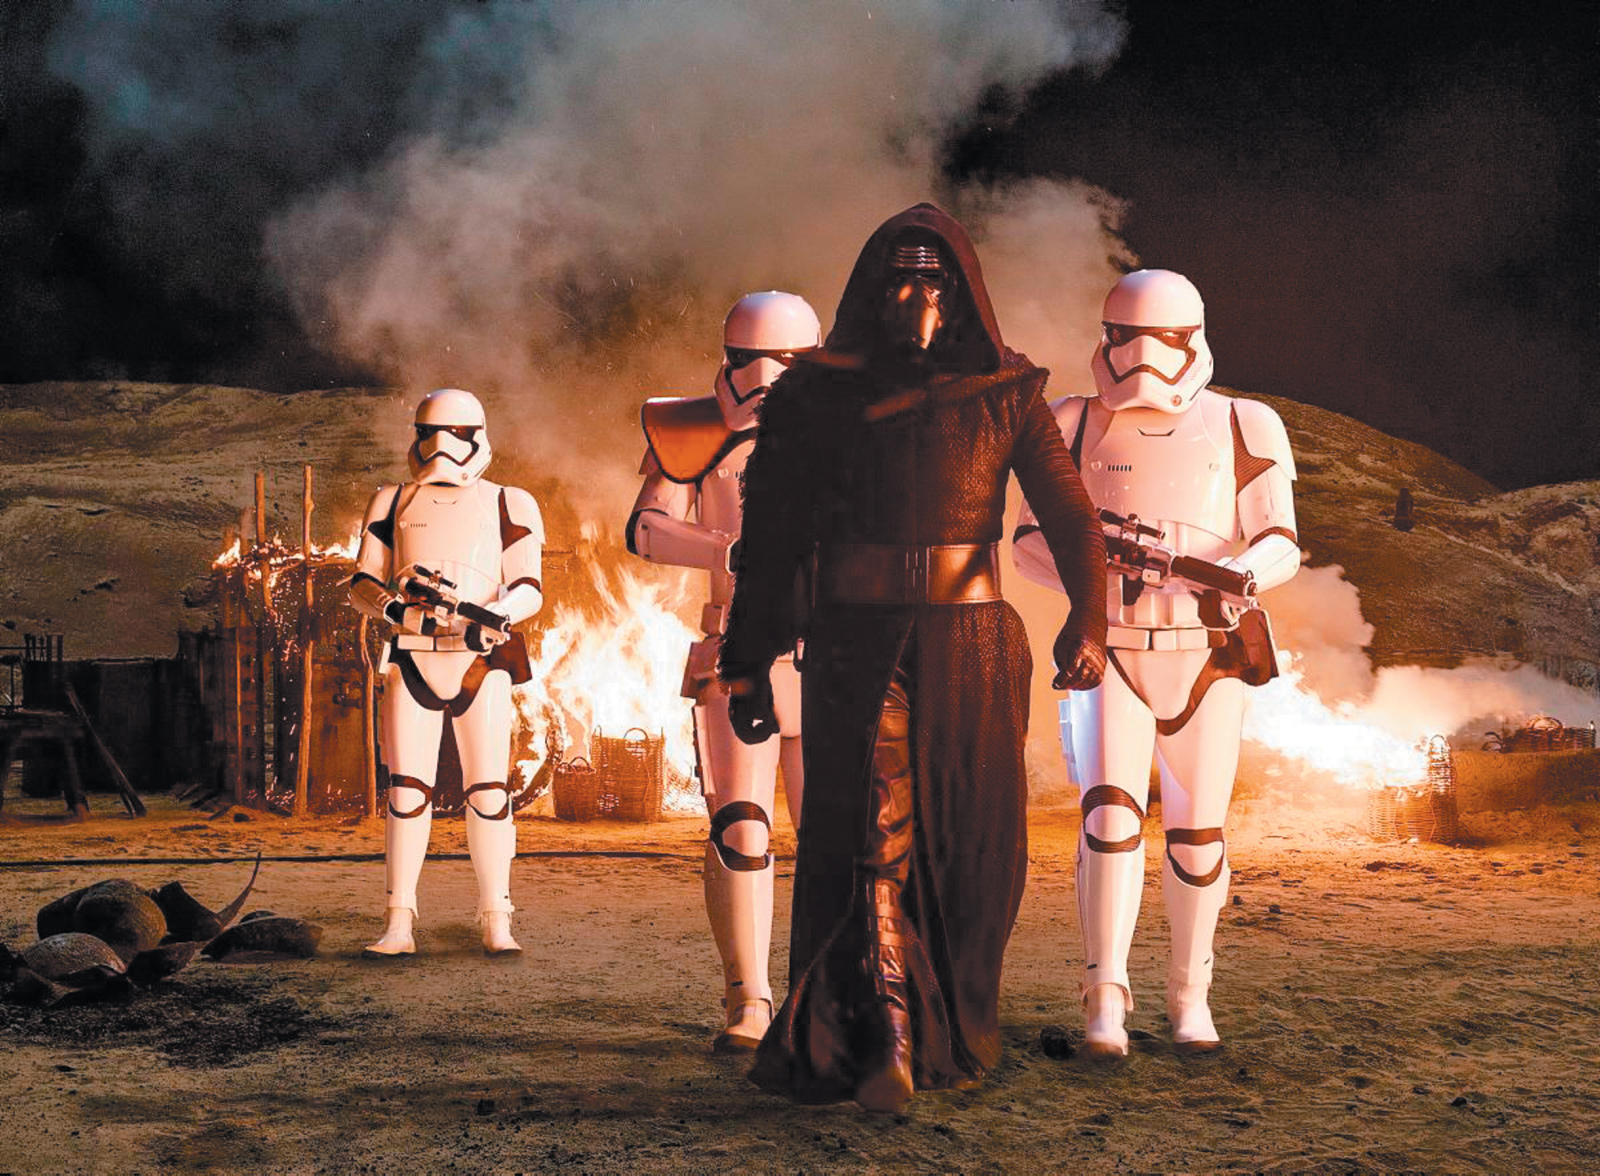 Kylo Ren (Adam Driver) with First Order stormtroopers in Star Wars: The Force Awakens